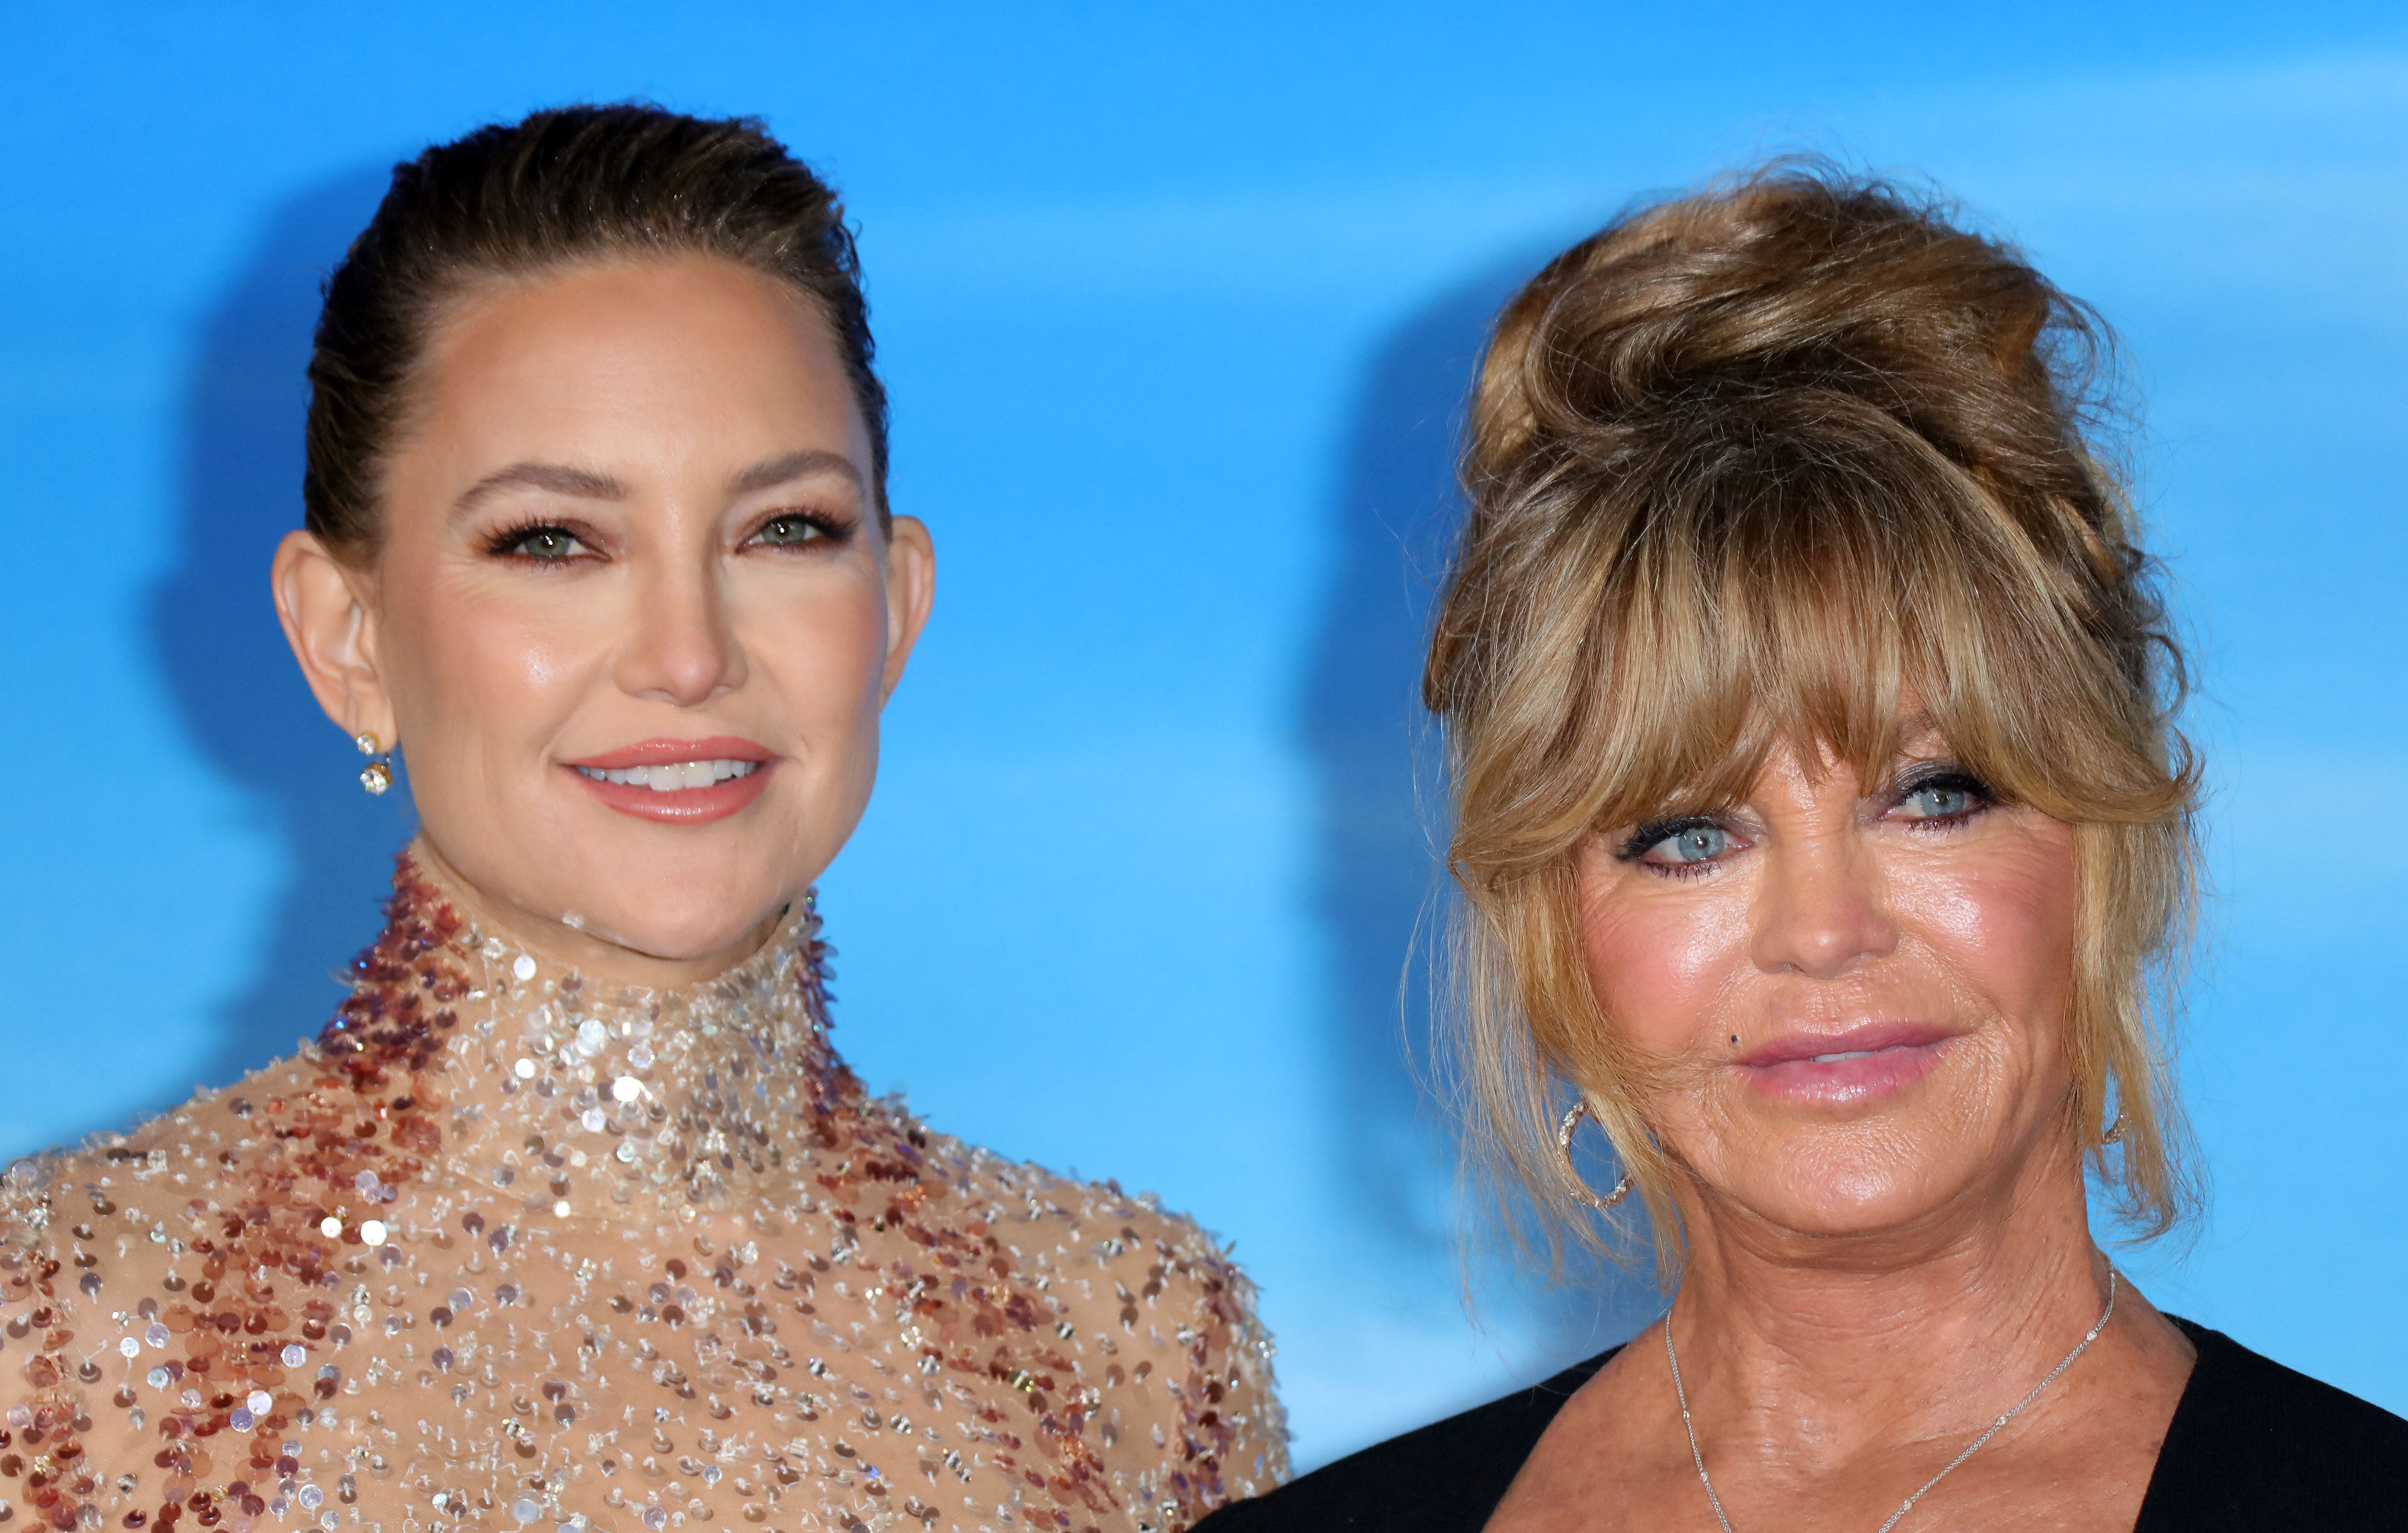 Kate Hudson and her mom Goldie Hawn in Los Angeles, November 14, 2022. | Source: Getty Images